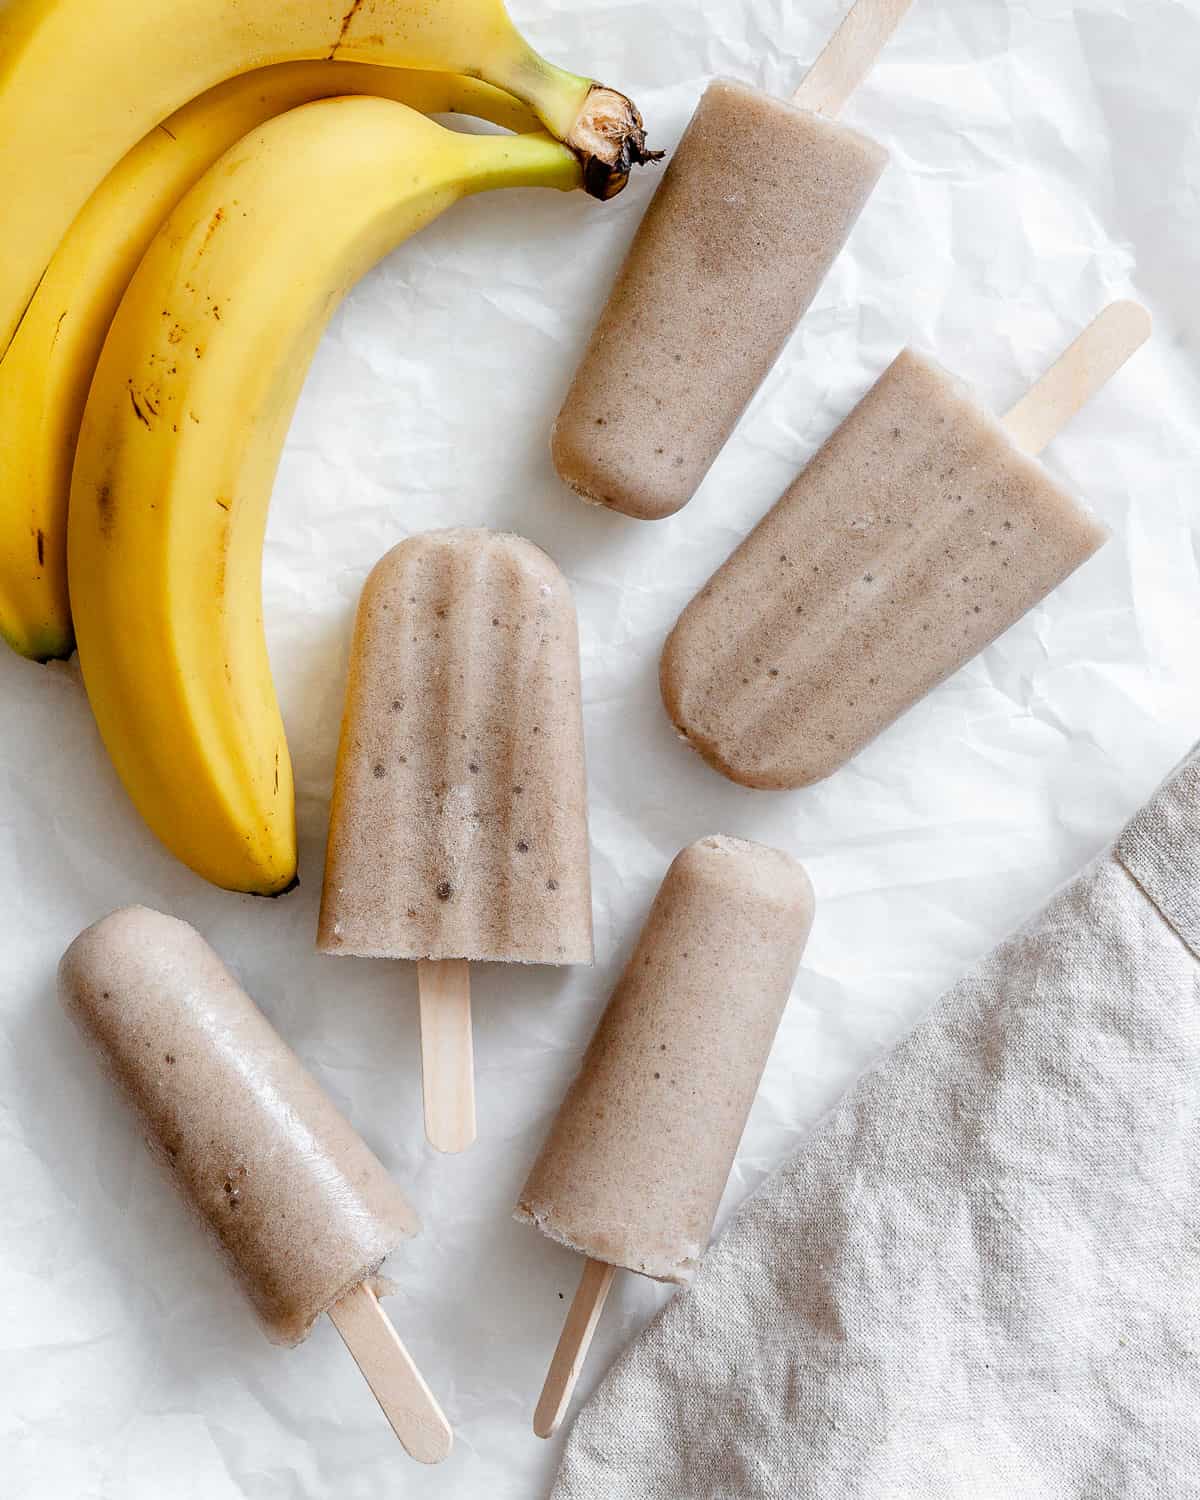 completed Healthy Banana Popsicles a،nst a white surface alongside bananas